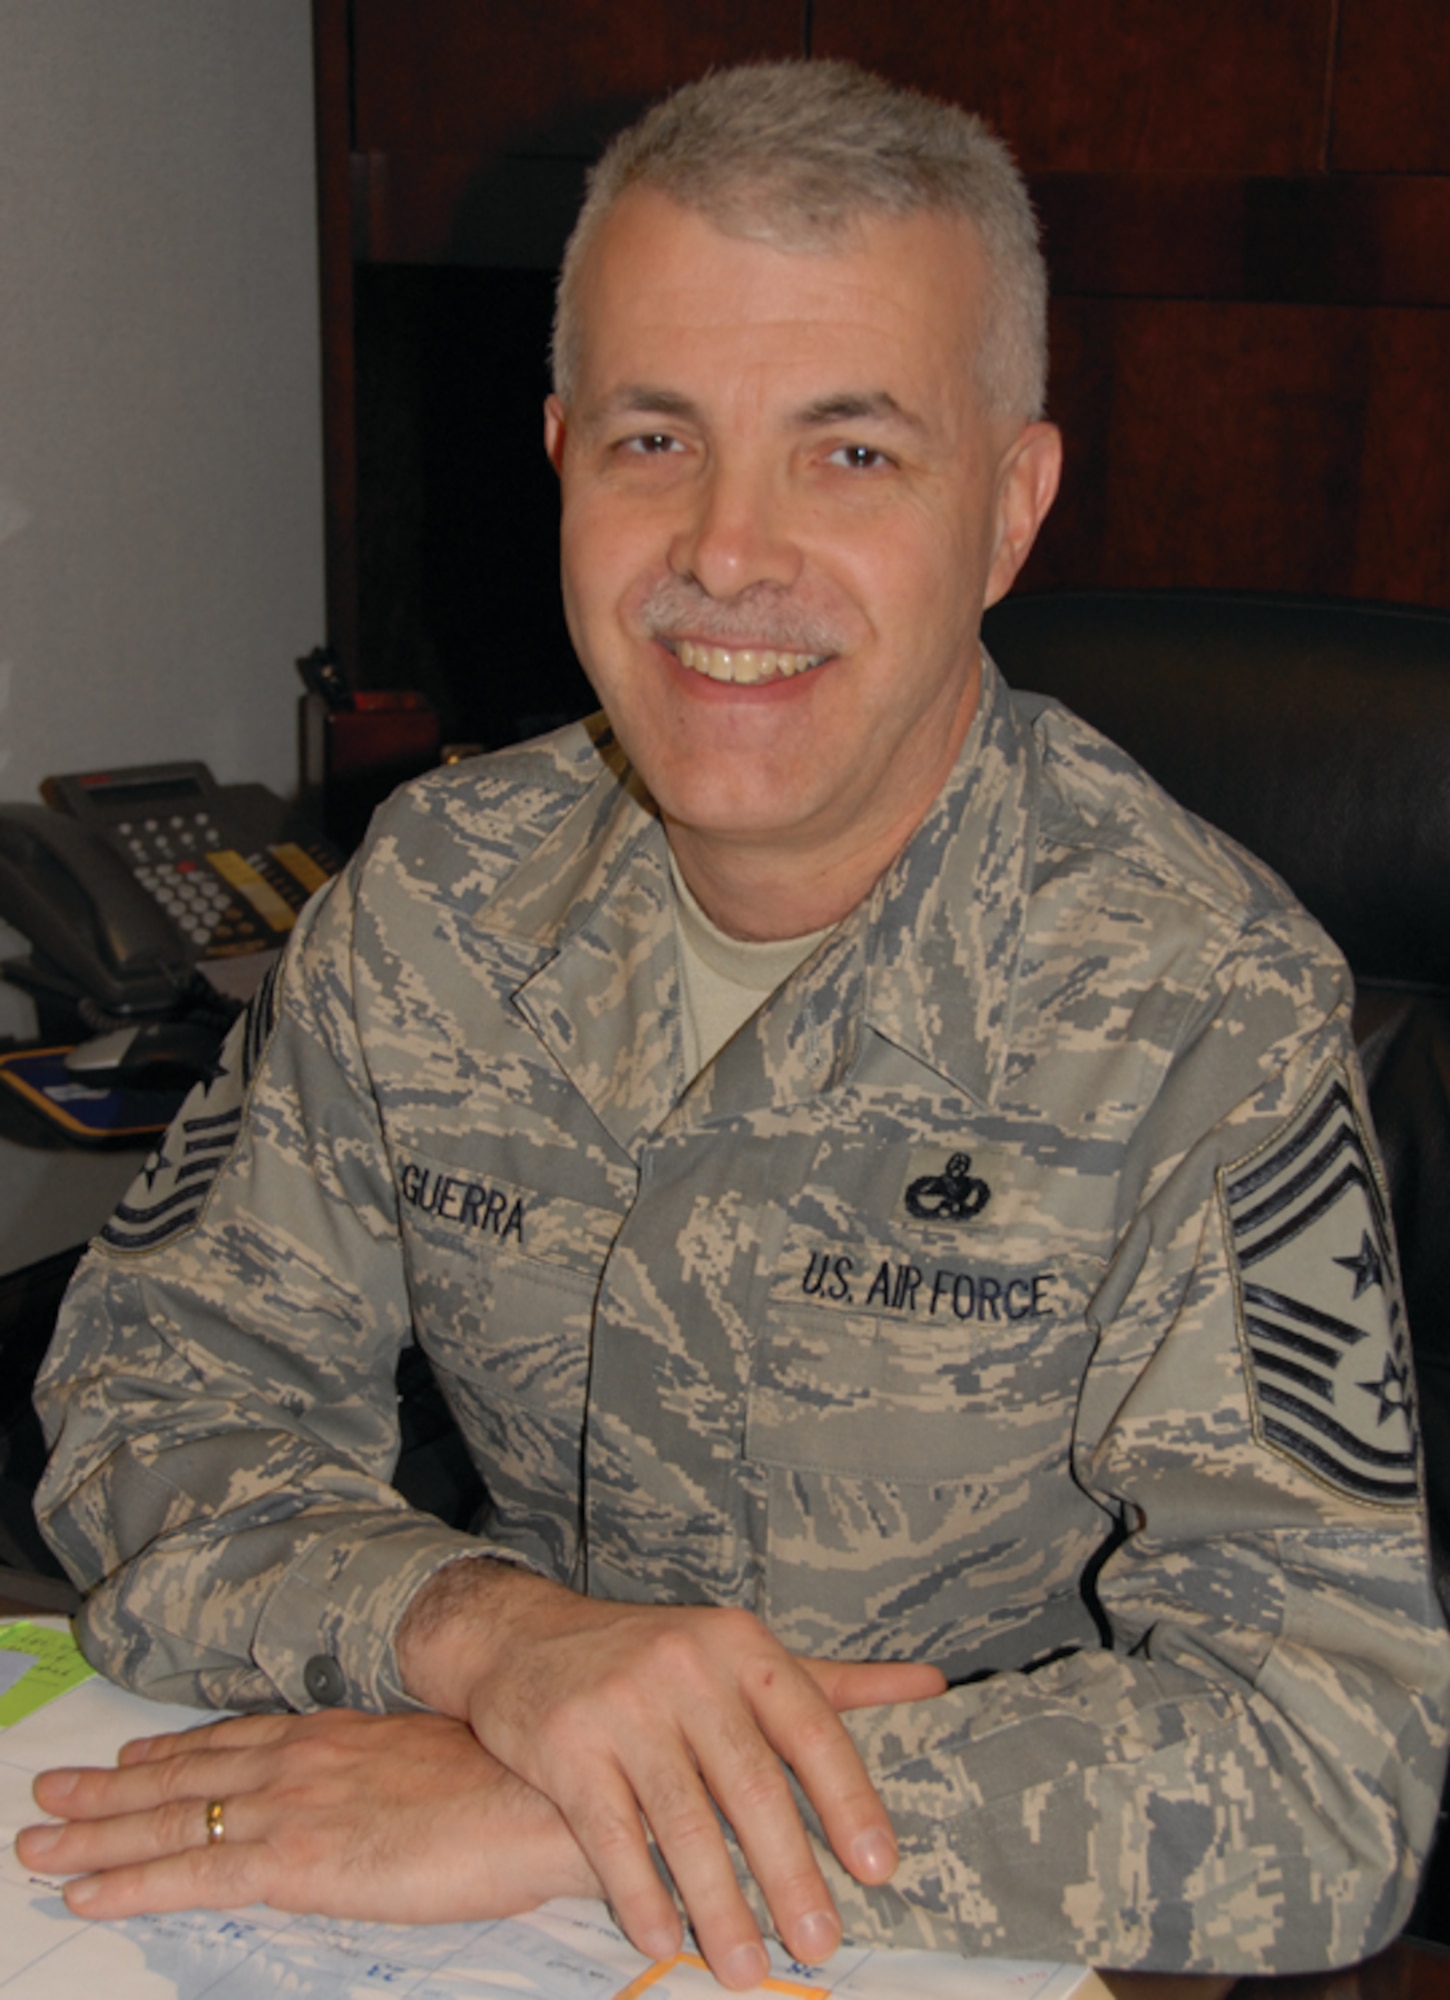 Chief Master Sgt. Vic Guerra has served as the wing commad chief of the 171st Air Refueling Wing in Pittsburgh since January 2007. (U.S. Air Force Photo by Master Sgt. Ann Young)